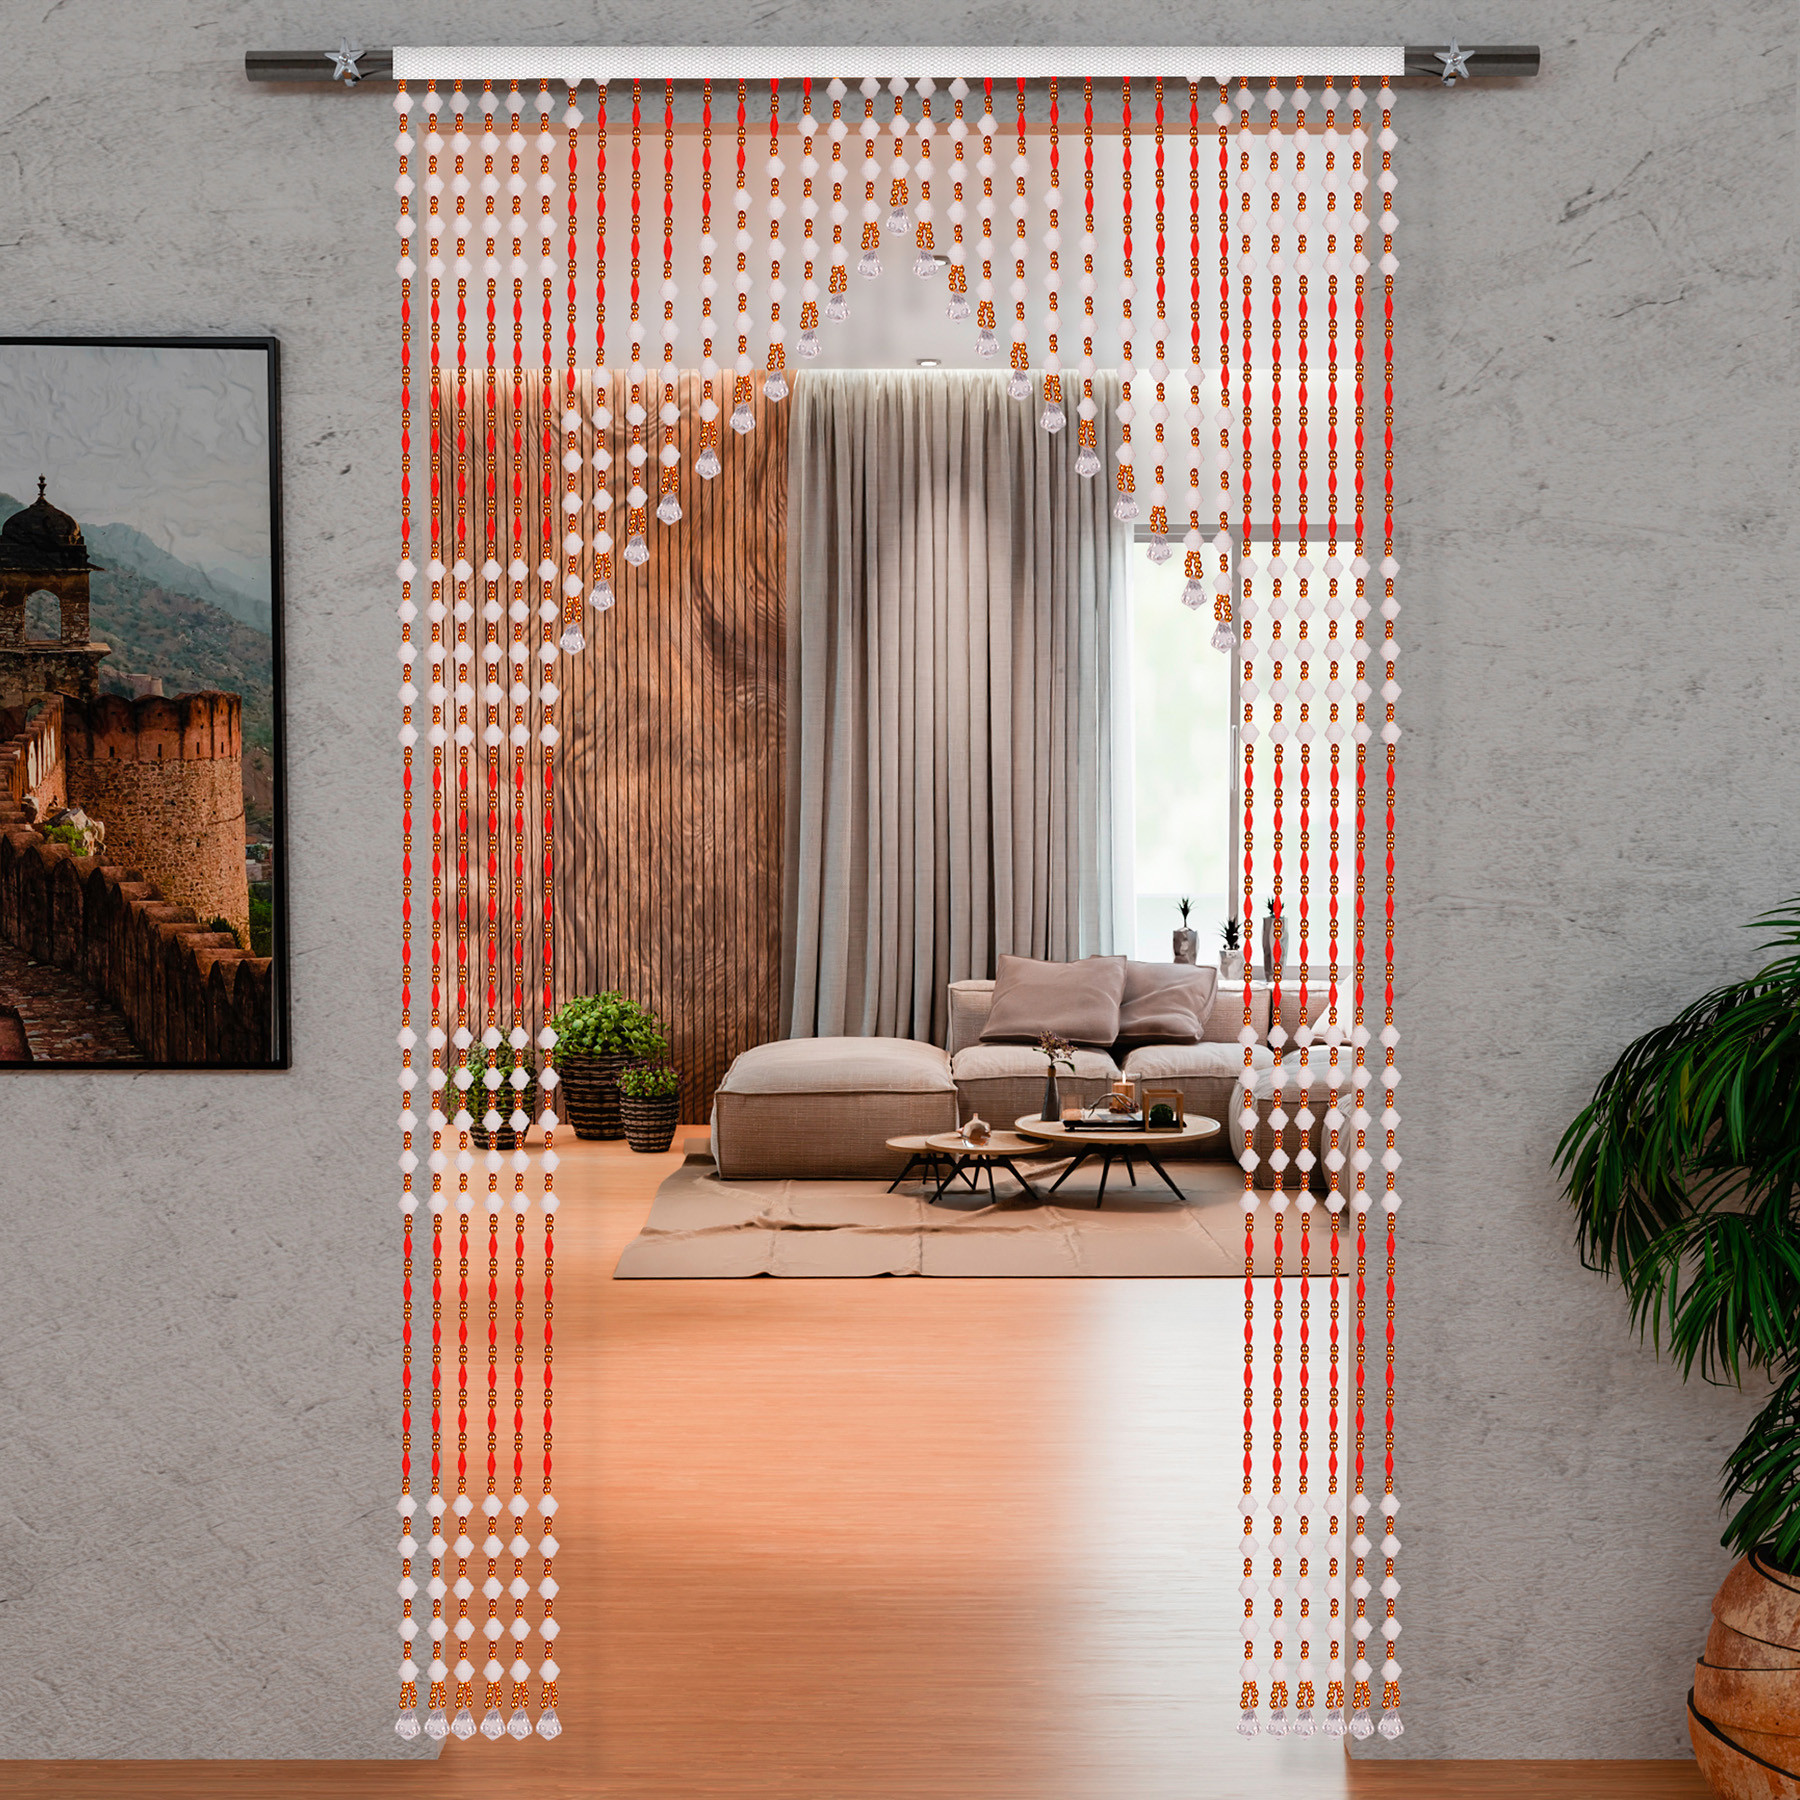 Pooja Room Decoration Items With Net Curtains